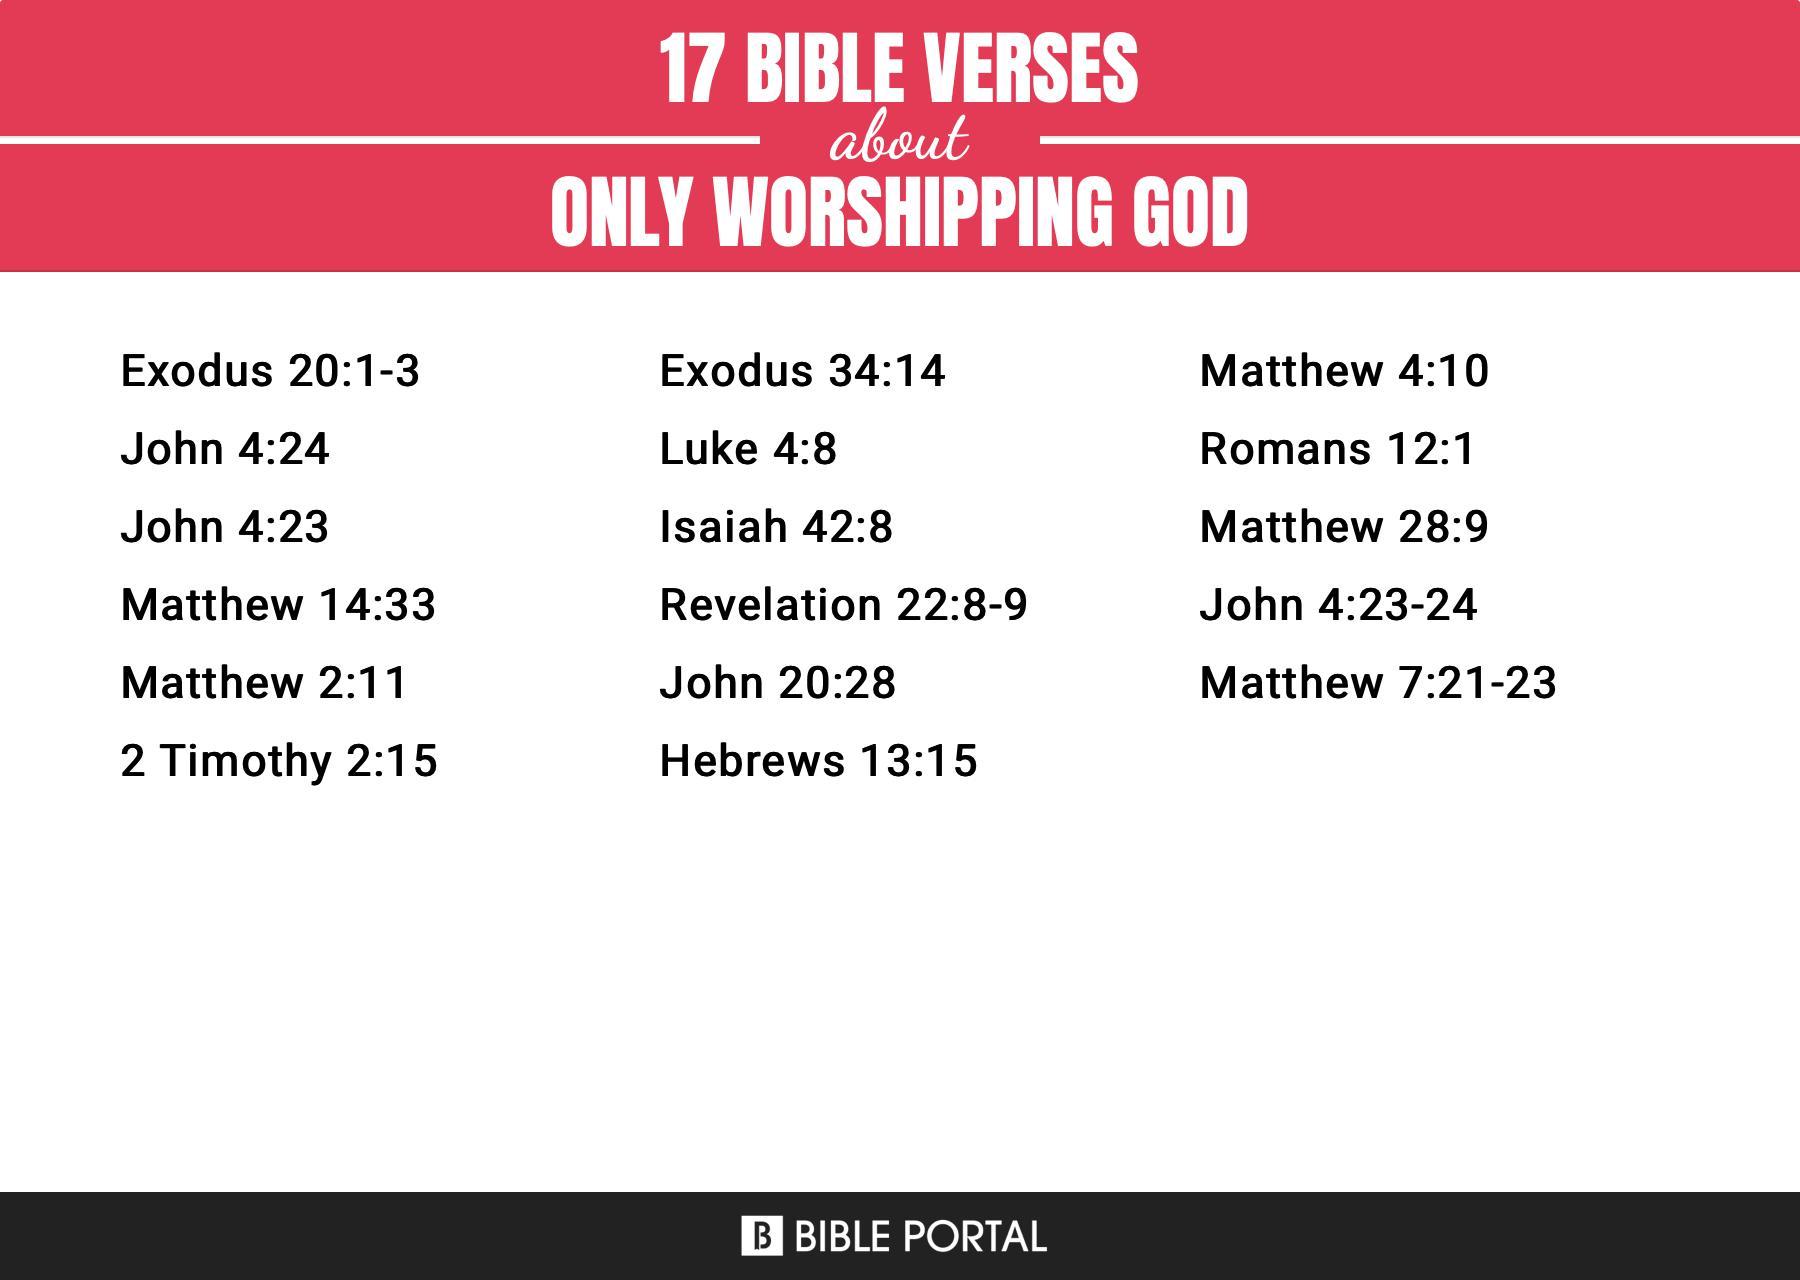 What Does the Bible Say about Only Worshipping God?